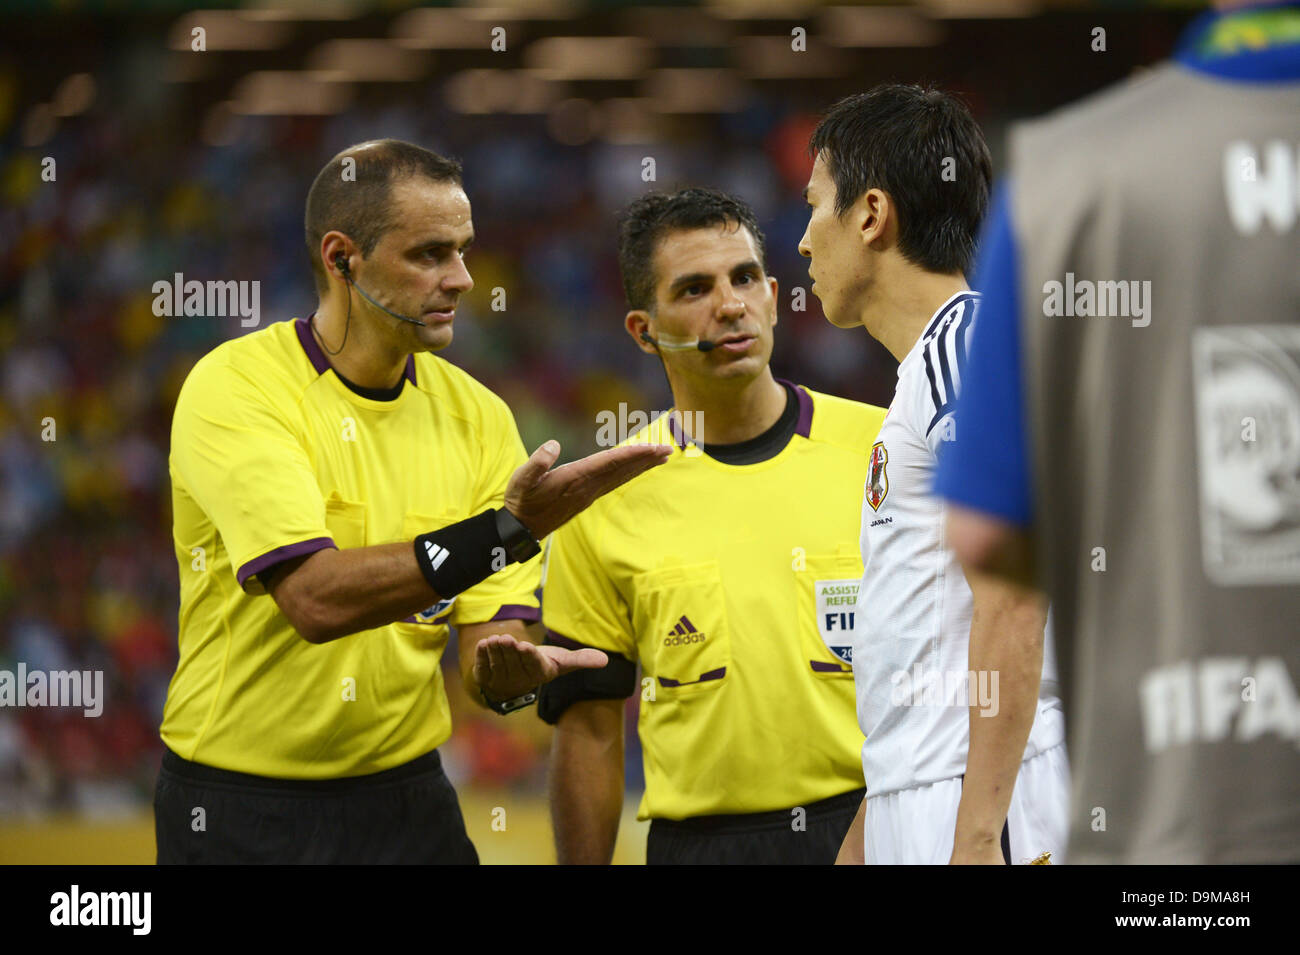 Recife, Brazil. 19th June, 2013. Diego Abal (Referee), Makoto Hasebe (JPN) Football / Soccer : Referee Diego Abal talks to Makoto Hasebe of Japan about the coin toss as assistant referee Hernan Maidana looks on before the FIFA Confederations Cup Brazil 2013 Group A match between Italy 4-3 Japan at Arena Pernambuco in Recife, Brazil . ©FAR EAST PRESS/AFLO/Alamy Live News Stock Photo